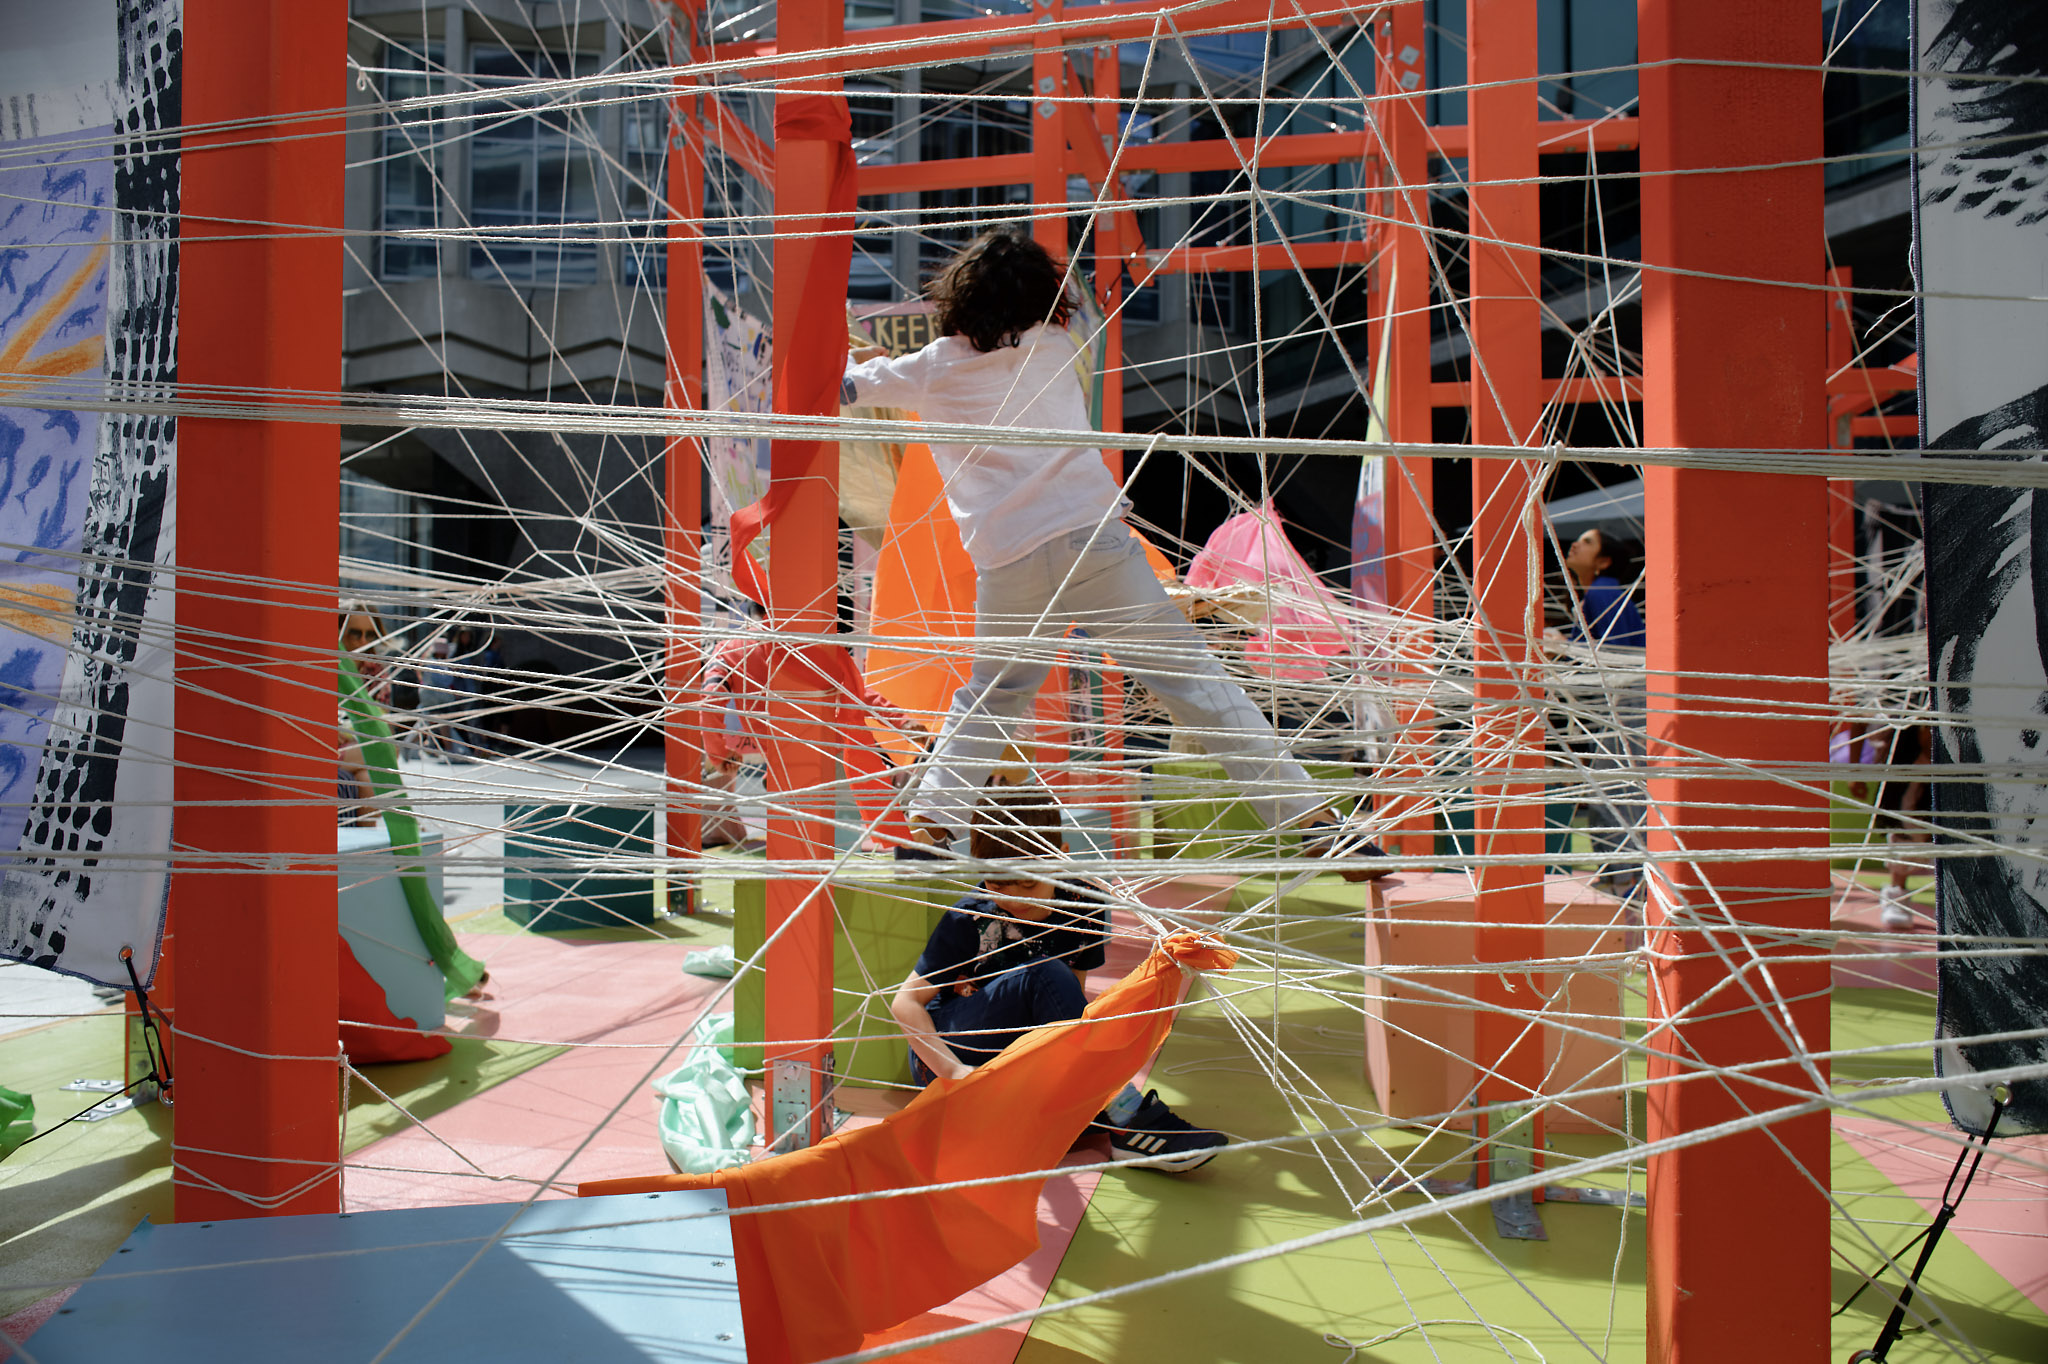 Mile of String London Festival of Architecture children playing red